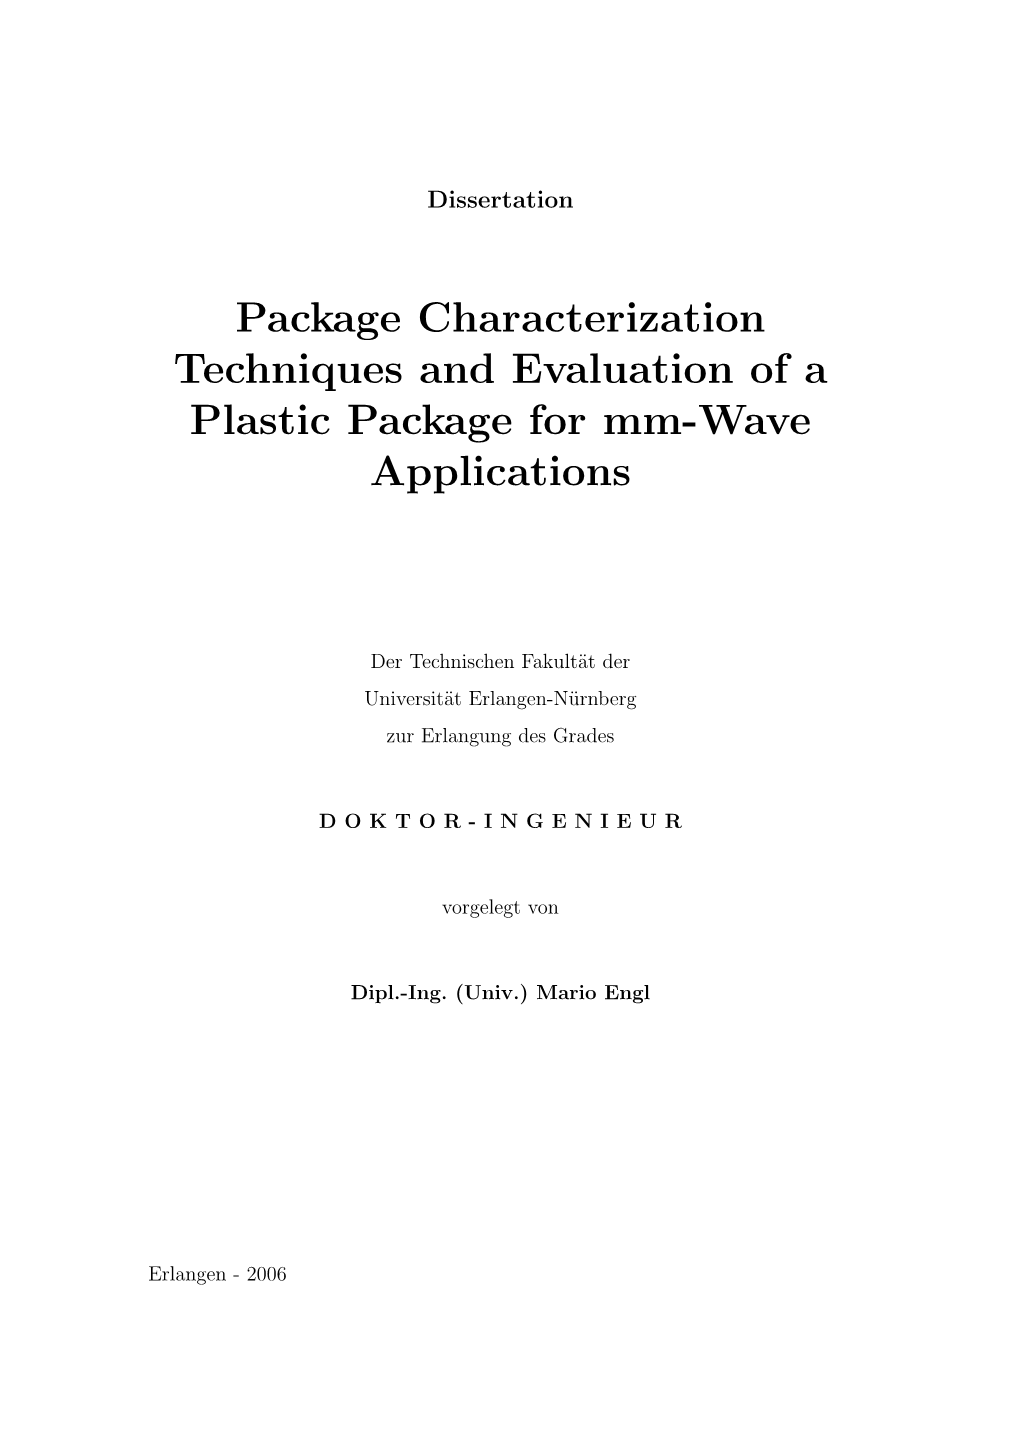 Package Characterization Techniques and Evaluation of a Plastic Package for Mm-Wave Applications